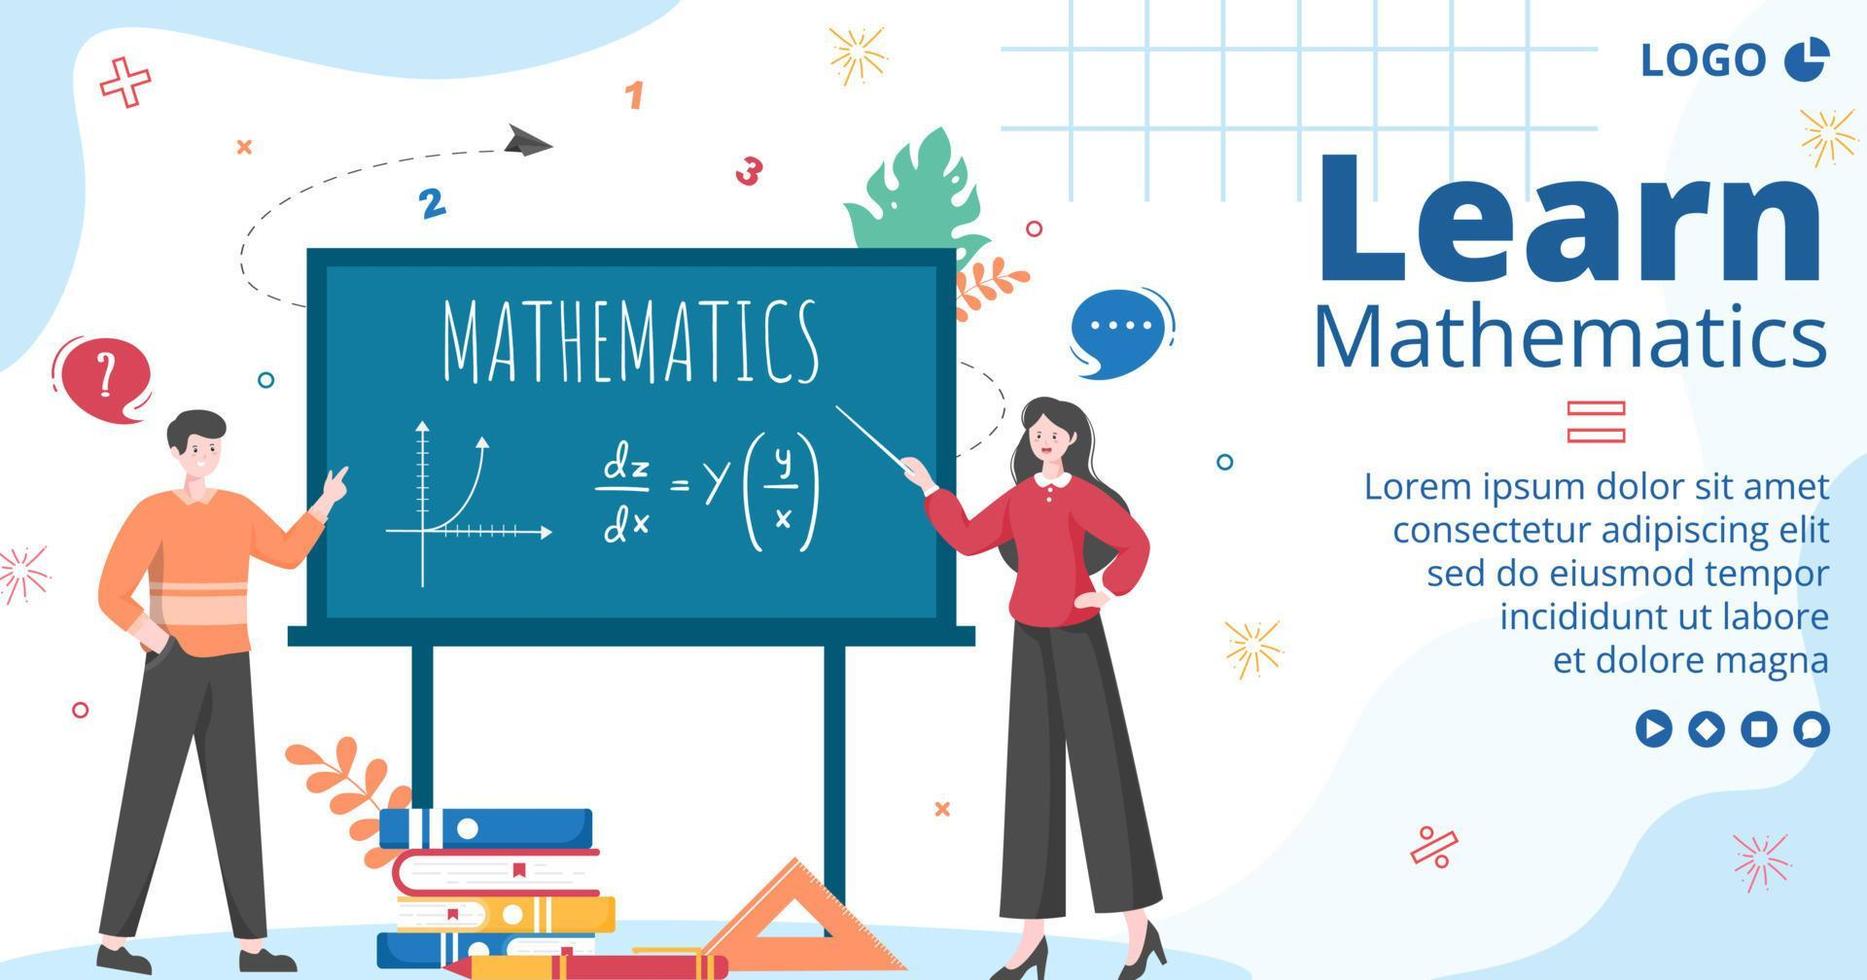 Learning Mathematics Education and Knowledge Post Template Flat Illustration Editable of Square Background Suitable for Social Media or Web vector